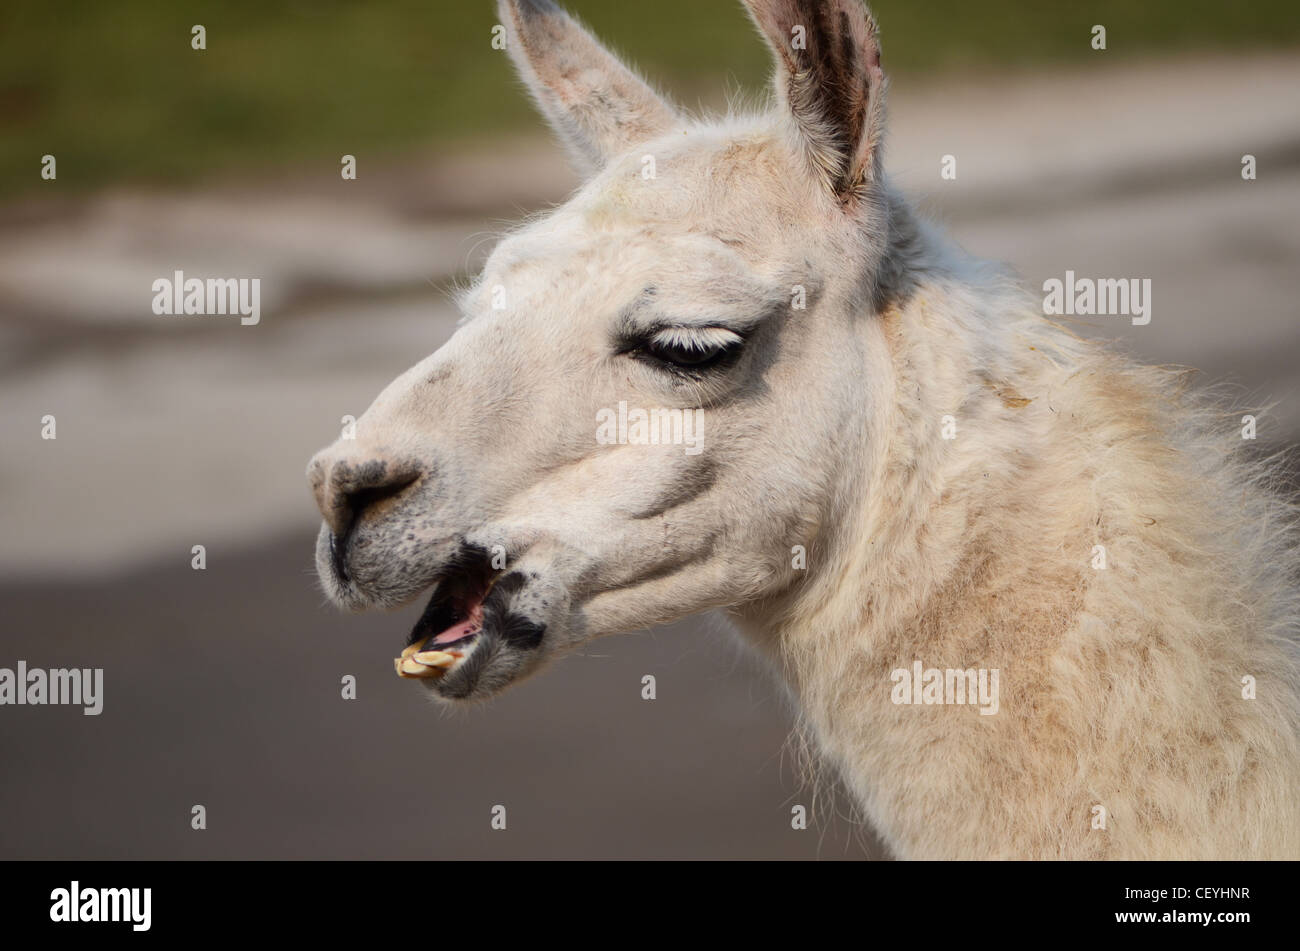 the llama is neighing Stock Photo